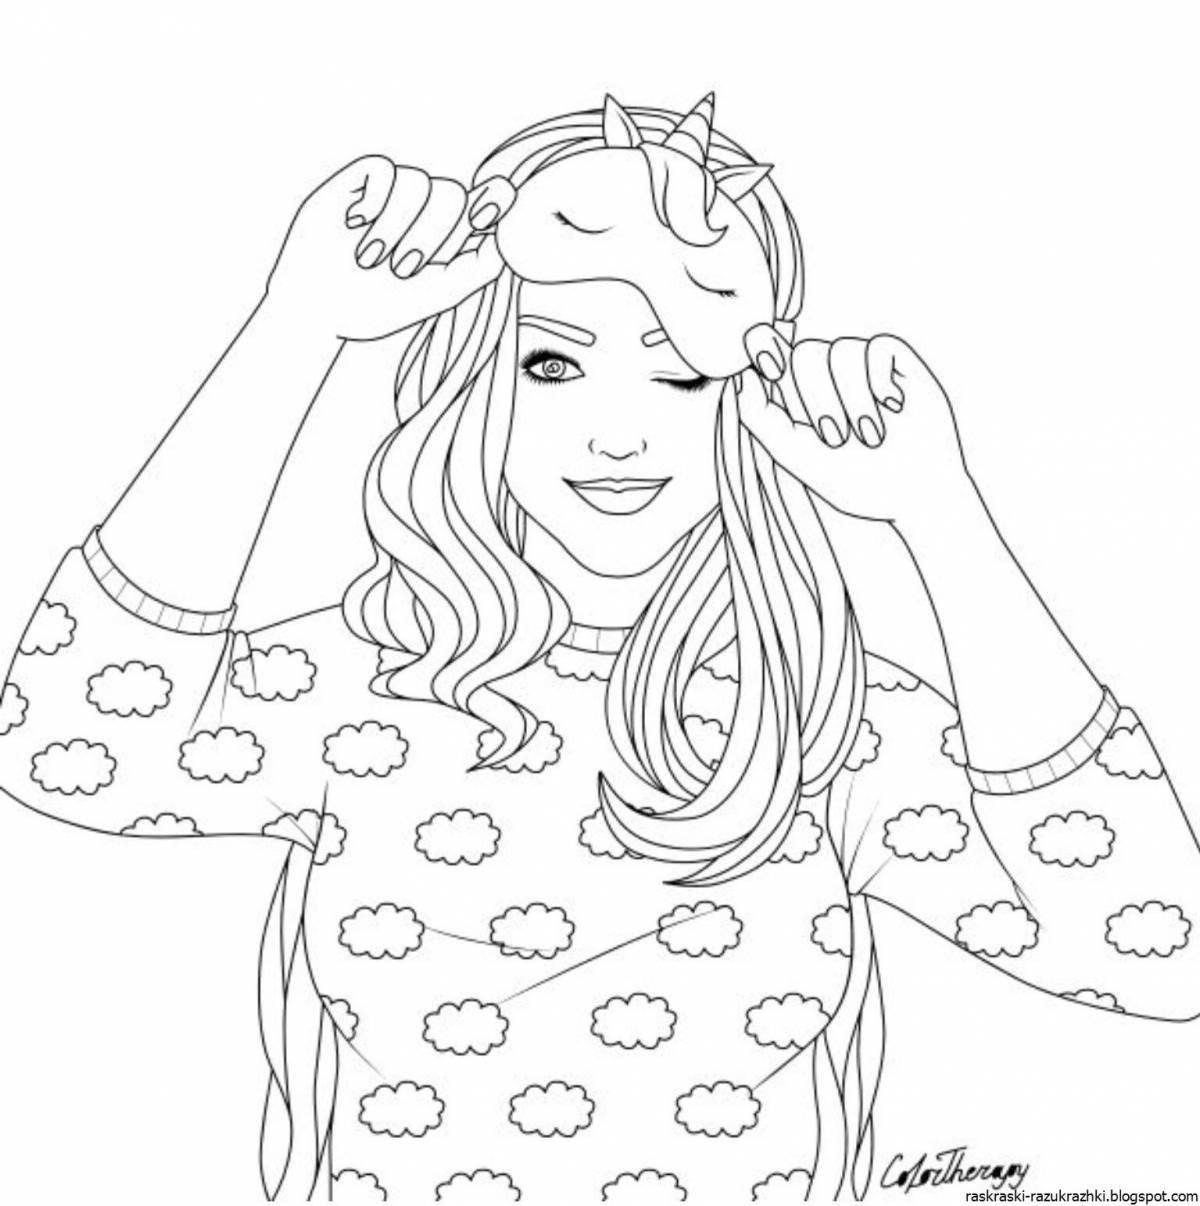 Miss nicole coloring pages